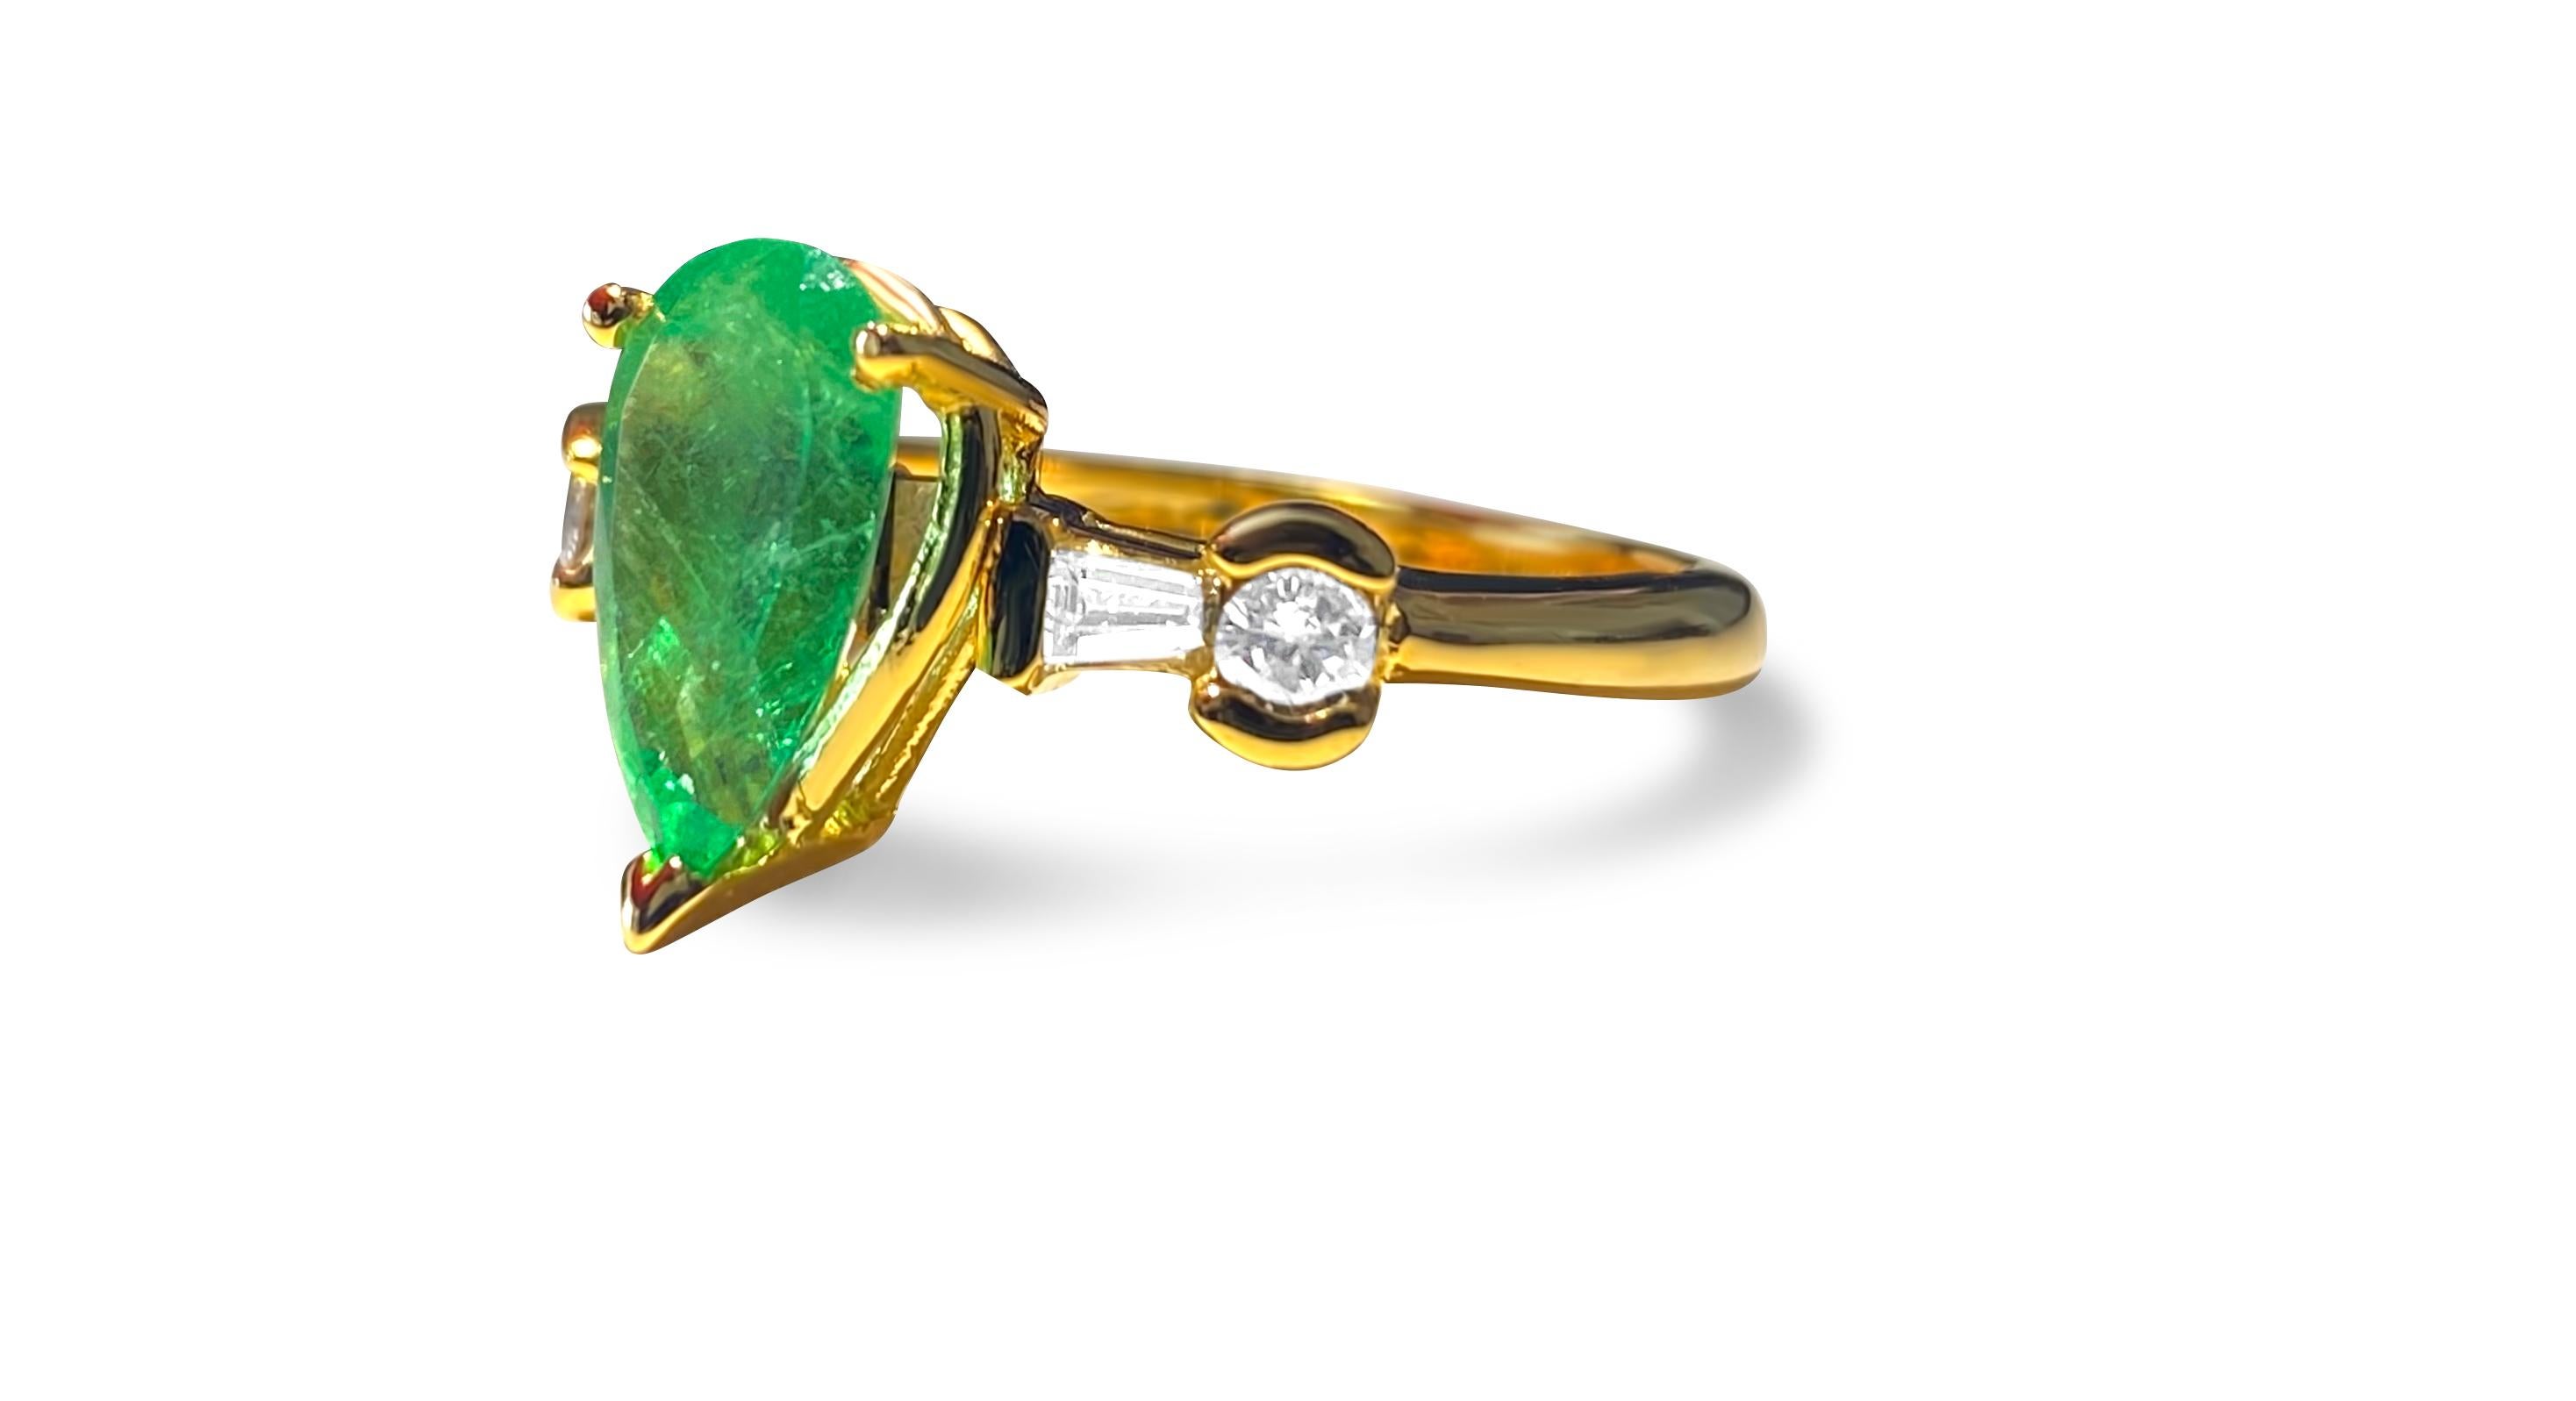 Metal: 14K yellow gold.

Diamonds: 0.40 carat weight total, VS-SI clarity and G color, round brilliant cut and baguette cut. 100% natural earth mined and genuine diamonds.

Emerald: 1.90 carat weight total, deep saturation and luster. Pear shape,